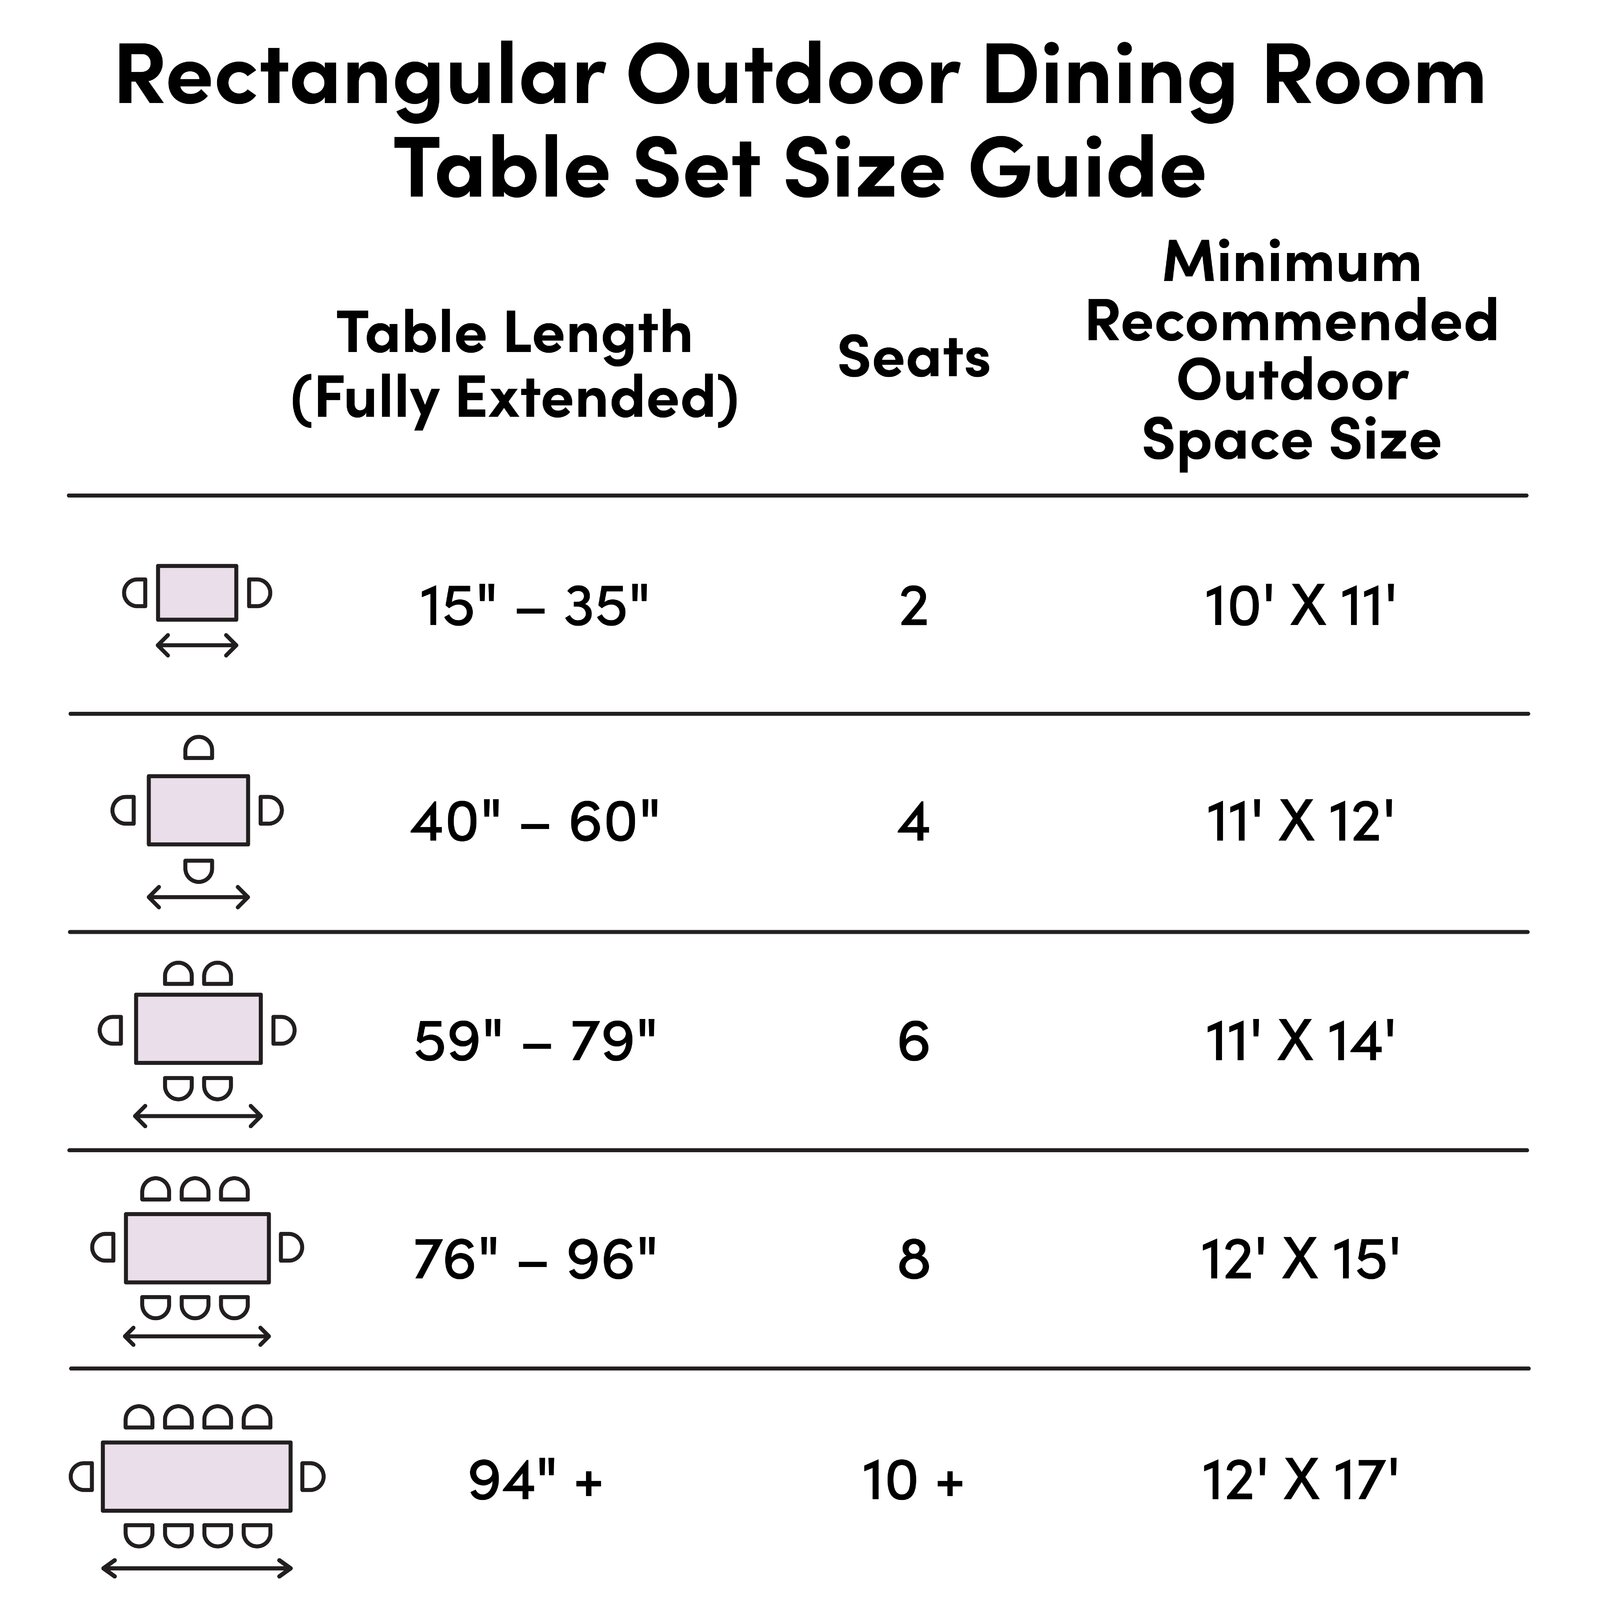 Whalan Outdoor 7 Piece Dining Set with Cushions, Product Weight: 155.4, Pieces Included: 1 Outdoor dining table and 6 outdoor dining chairs - image 2 of 6